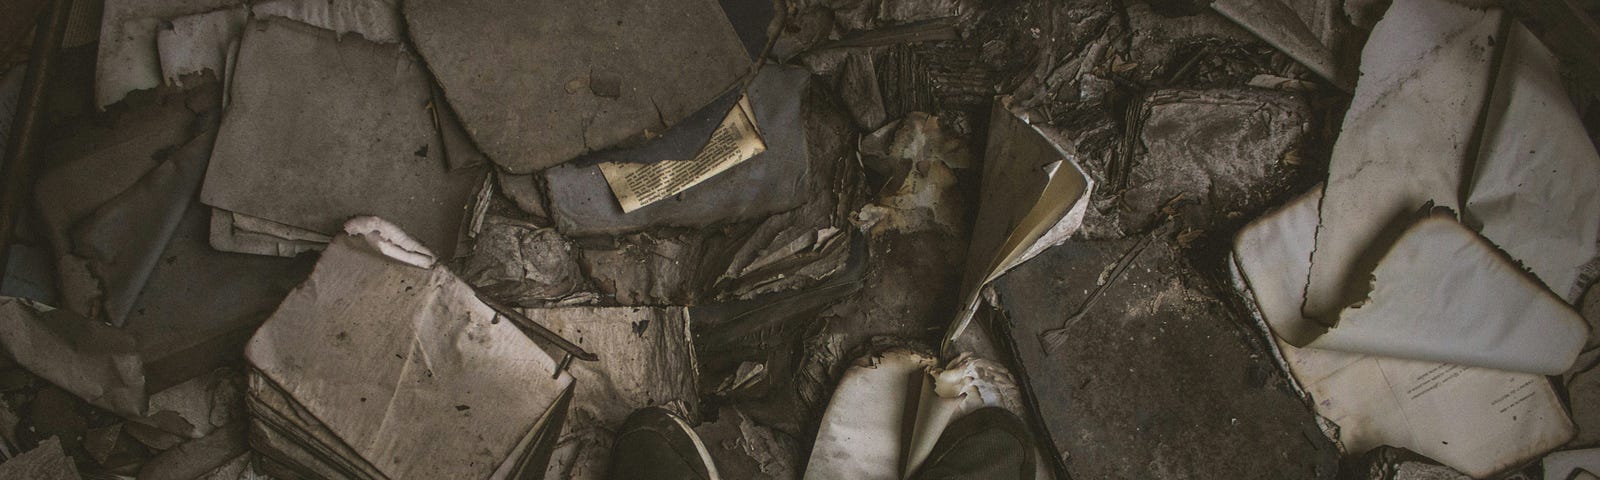 Someone standing over a piles of burnt books and personal things.